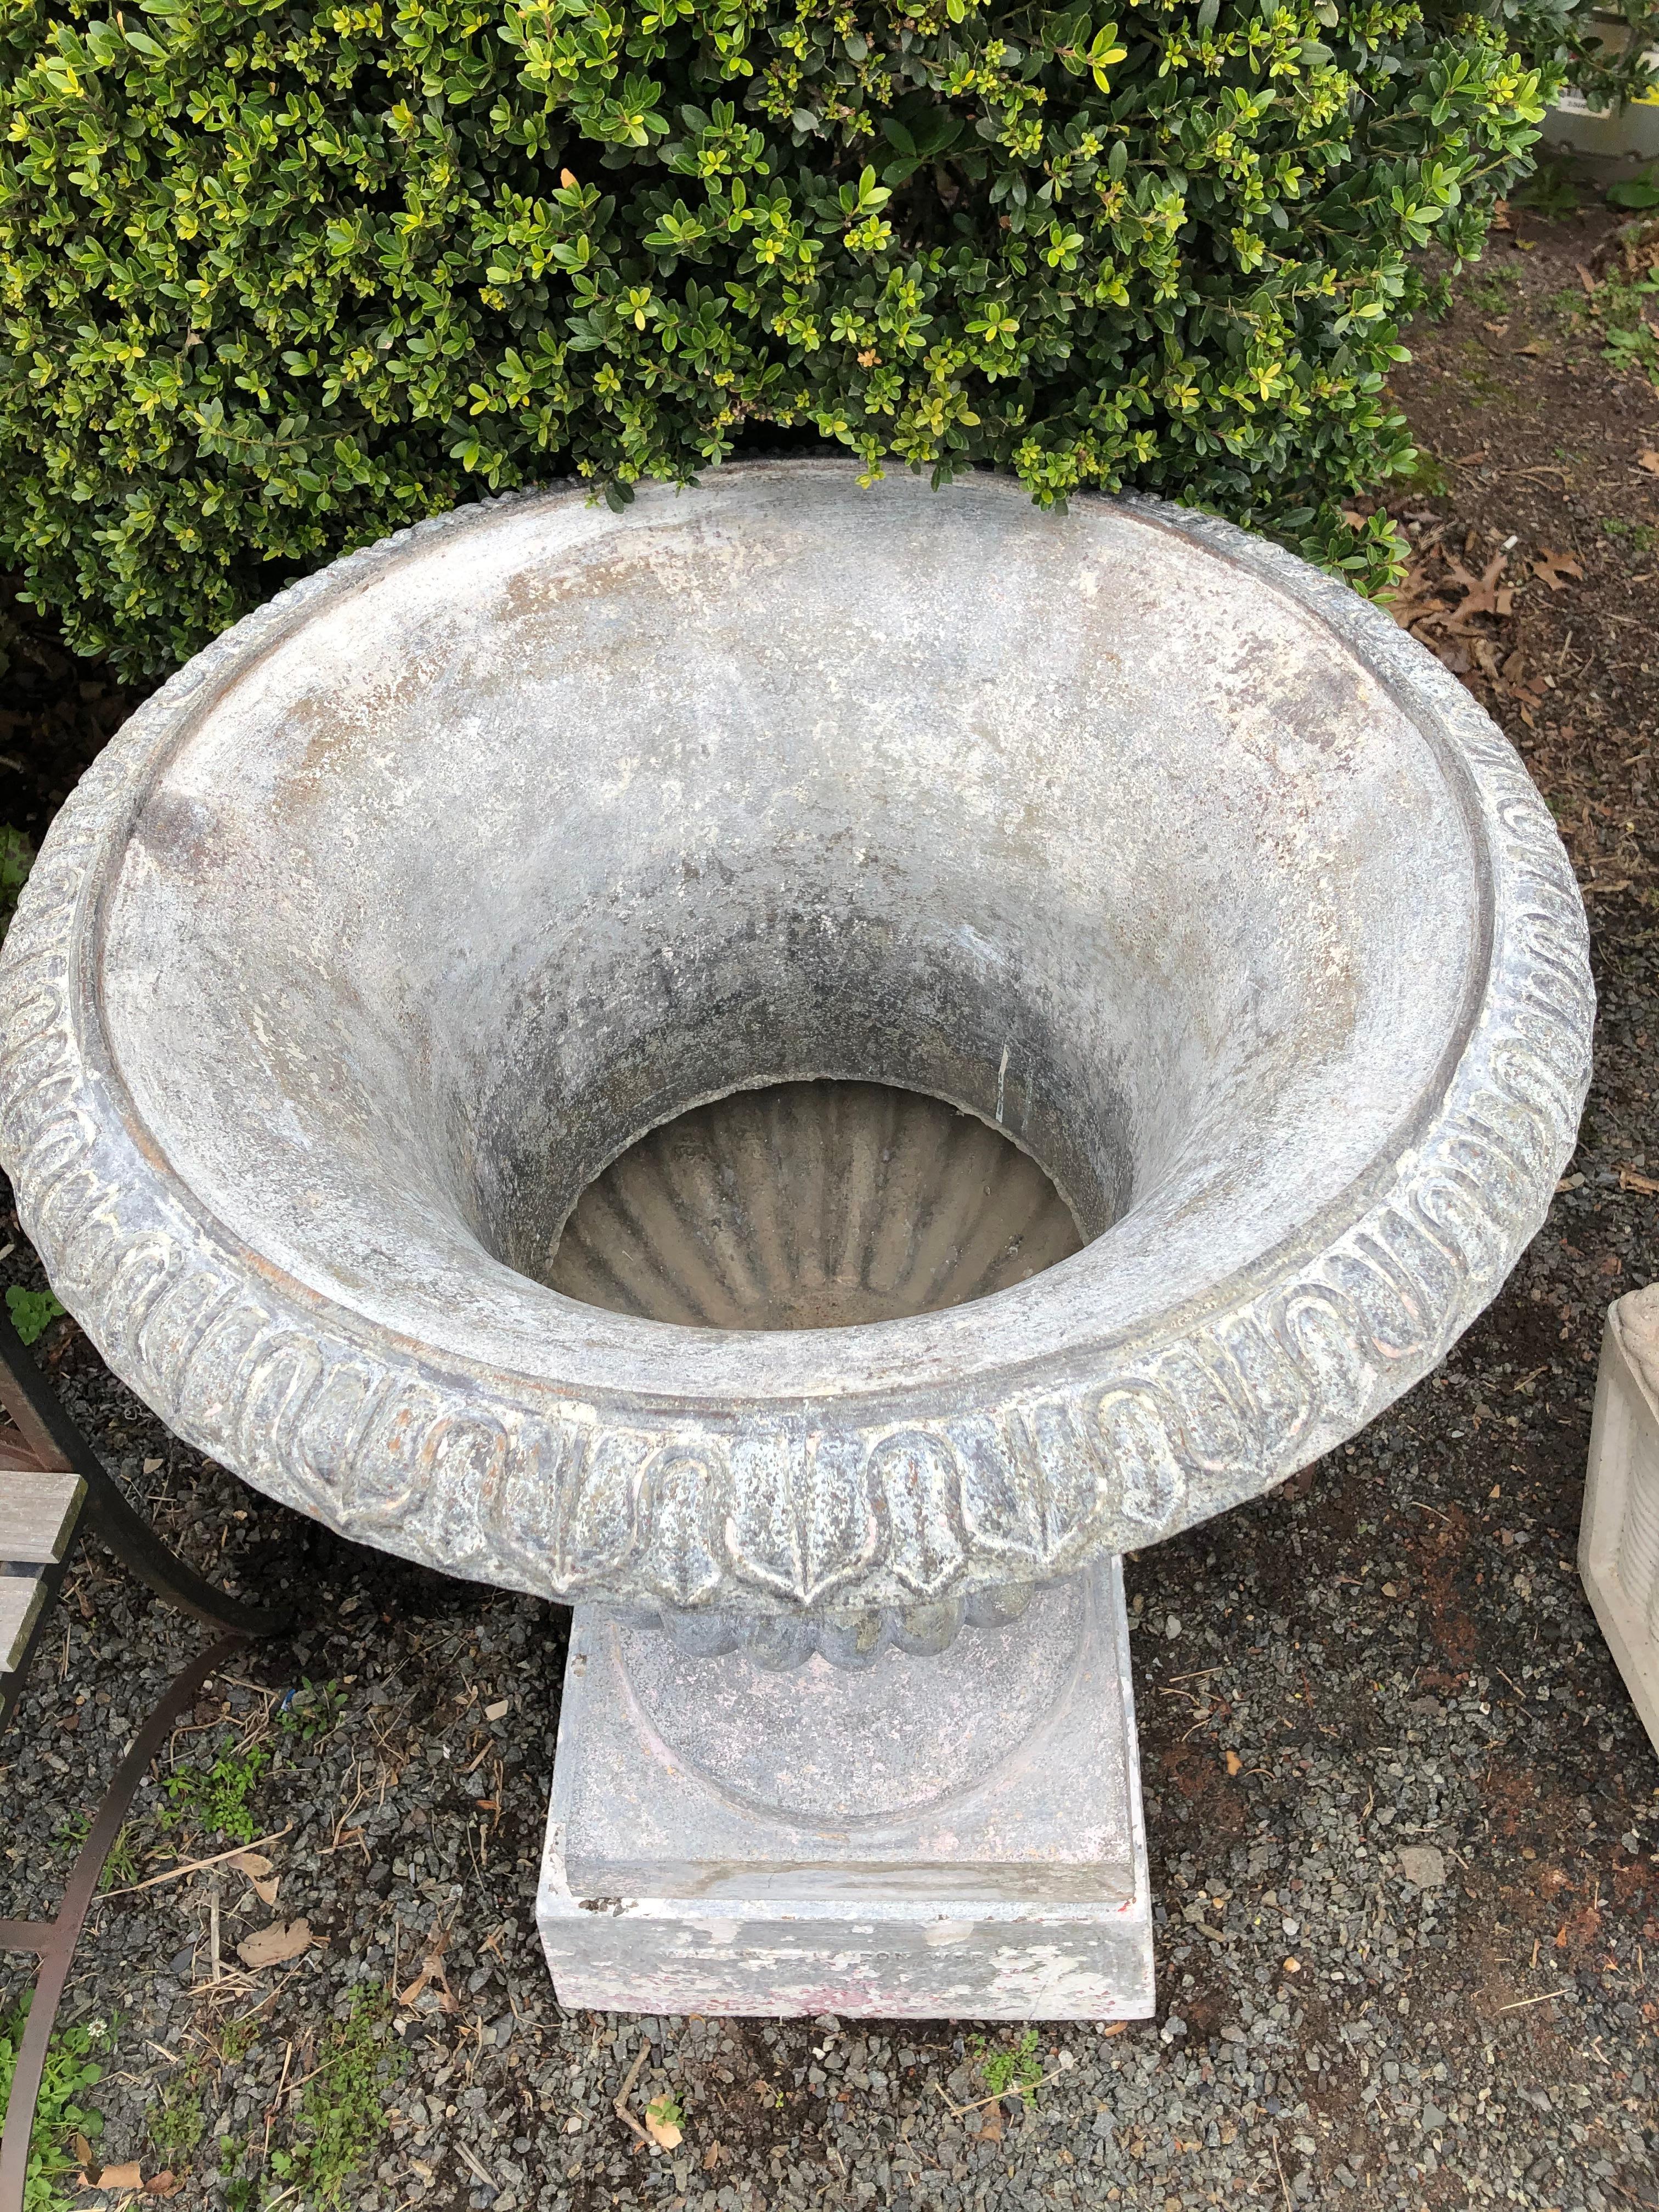 Classic Stately Mott Garden Urn Planter In Good Condition For Sale In Hopewell, NJ